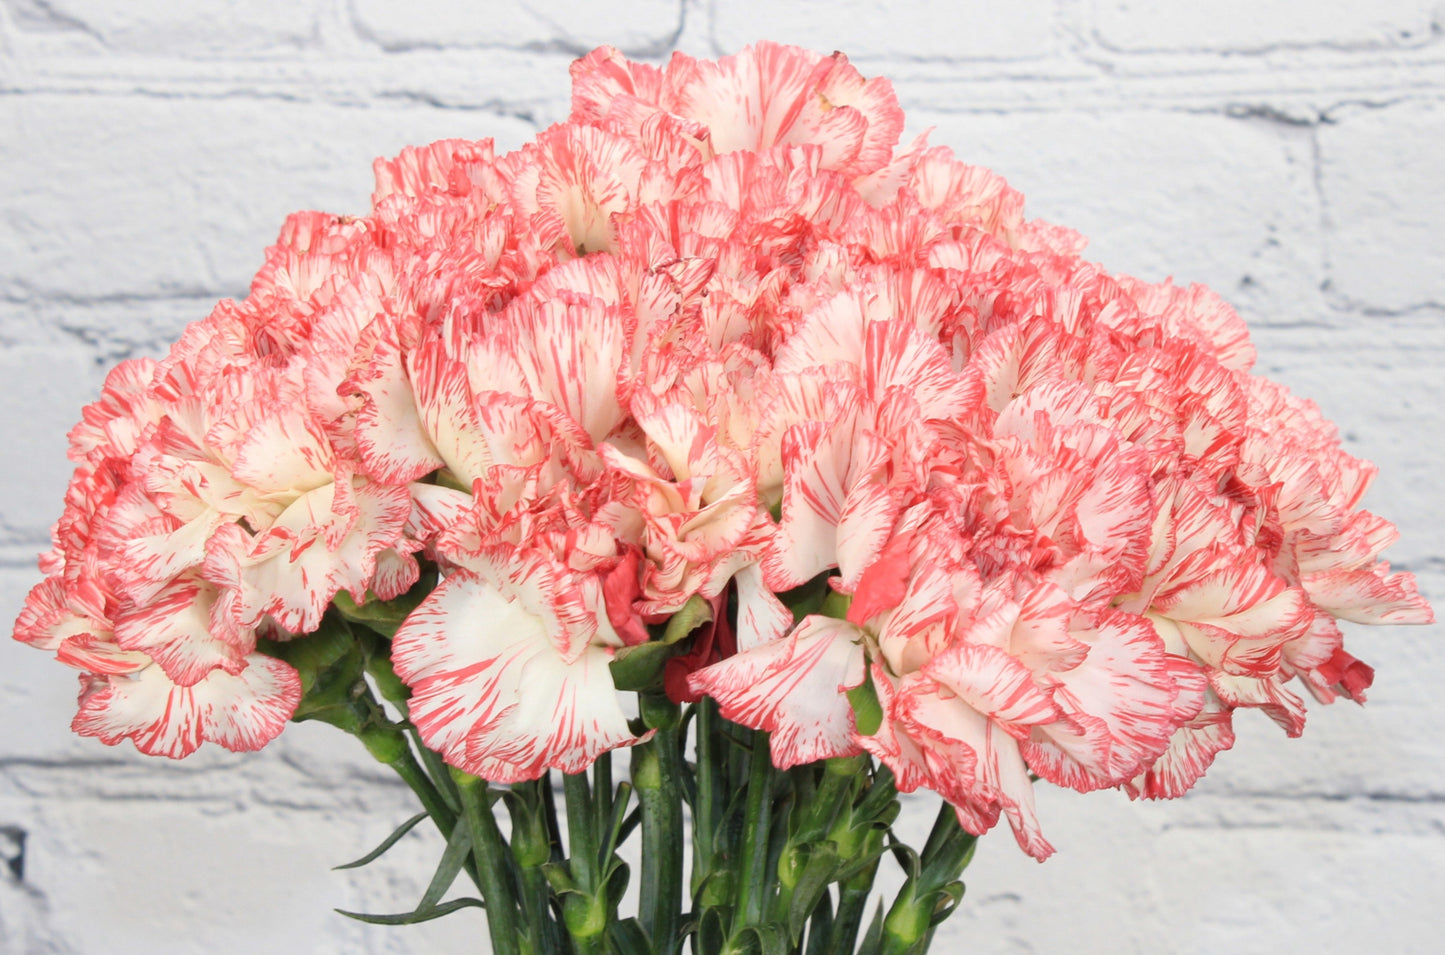 Fresh & Natural Carnations - White Red Bicolor